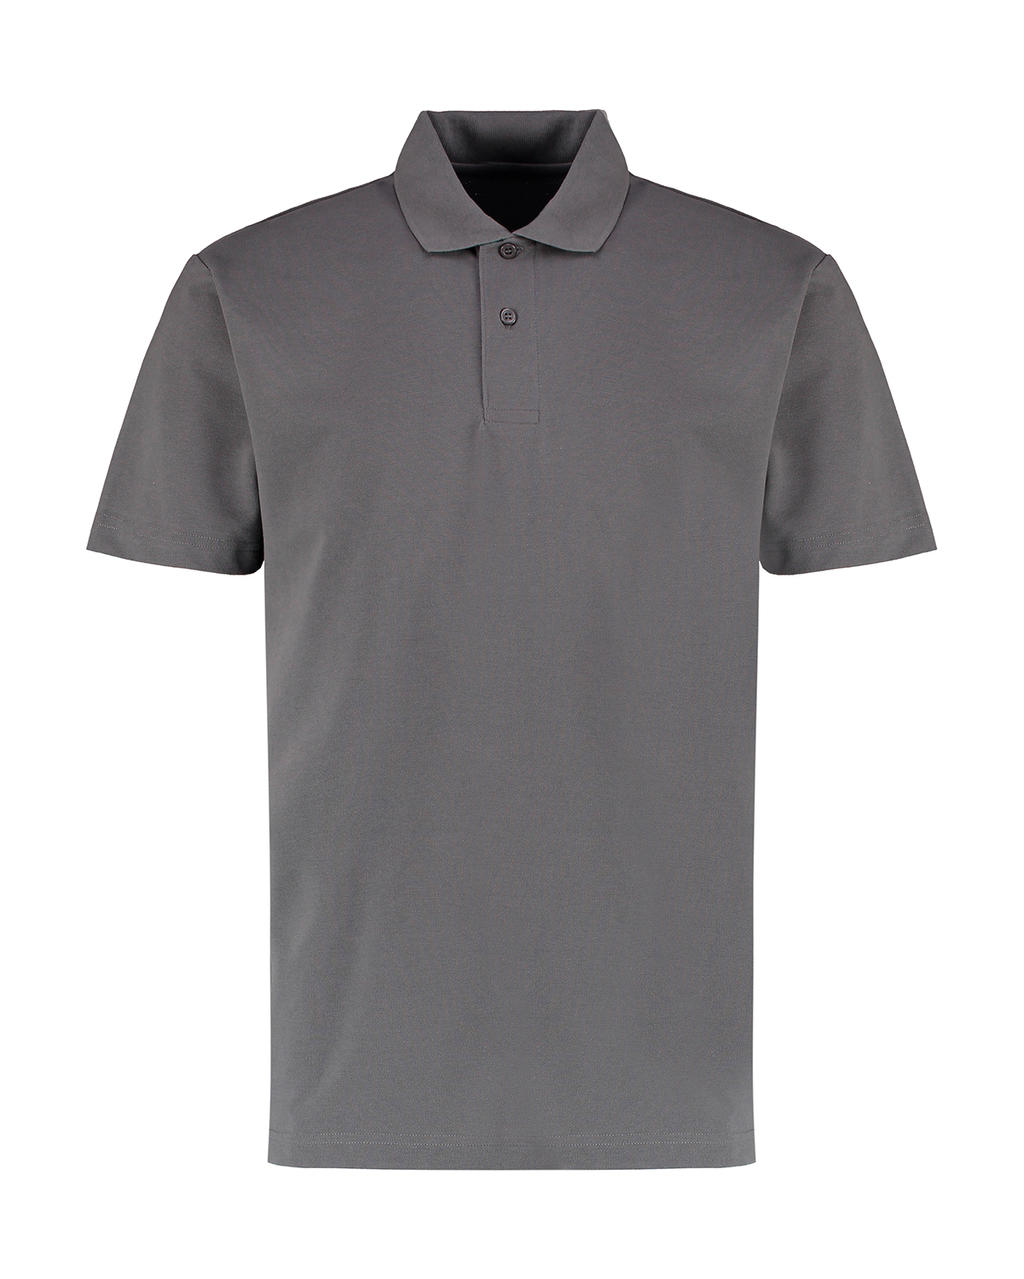  Mens Regular Fit Workforce Polo in Farbe Charcoal